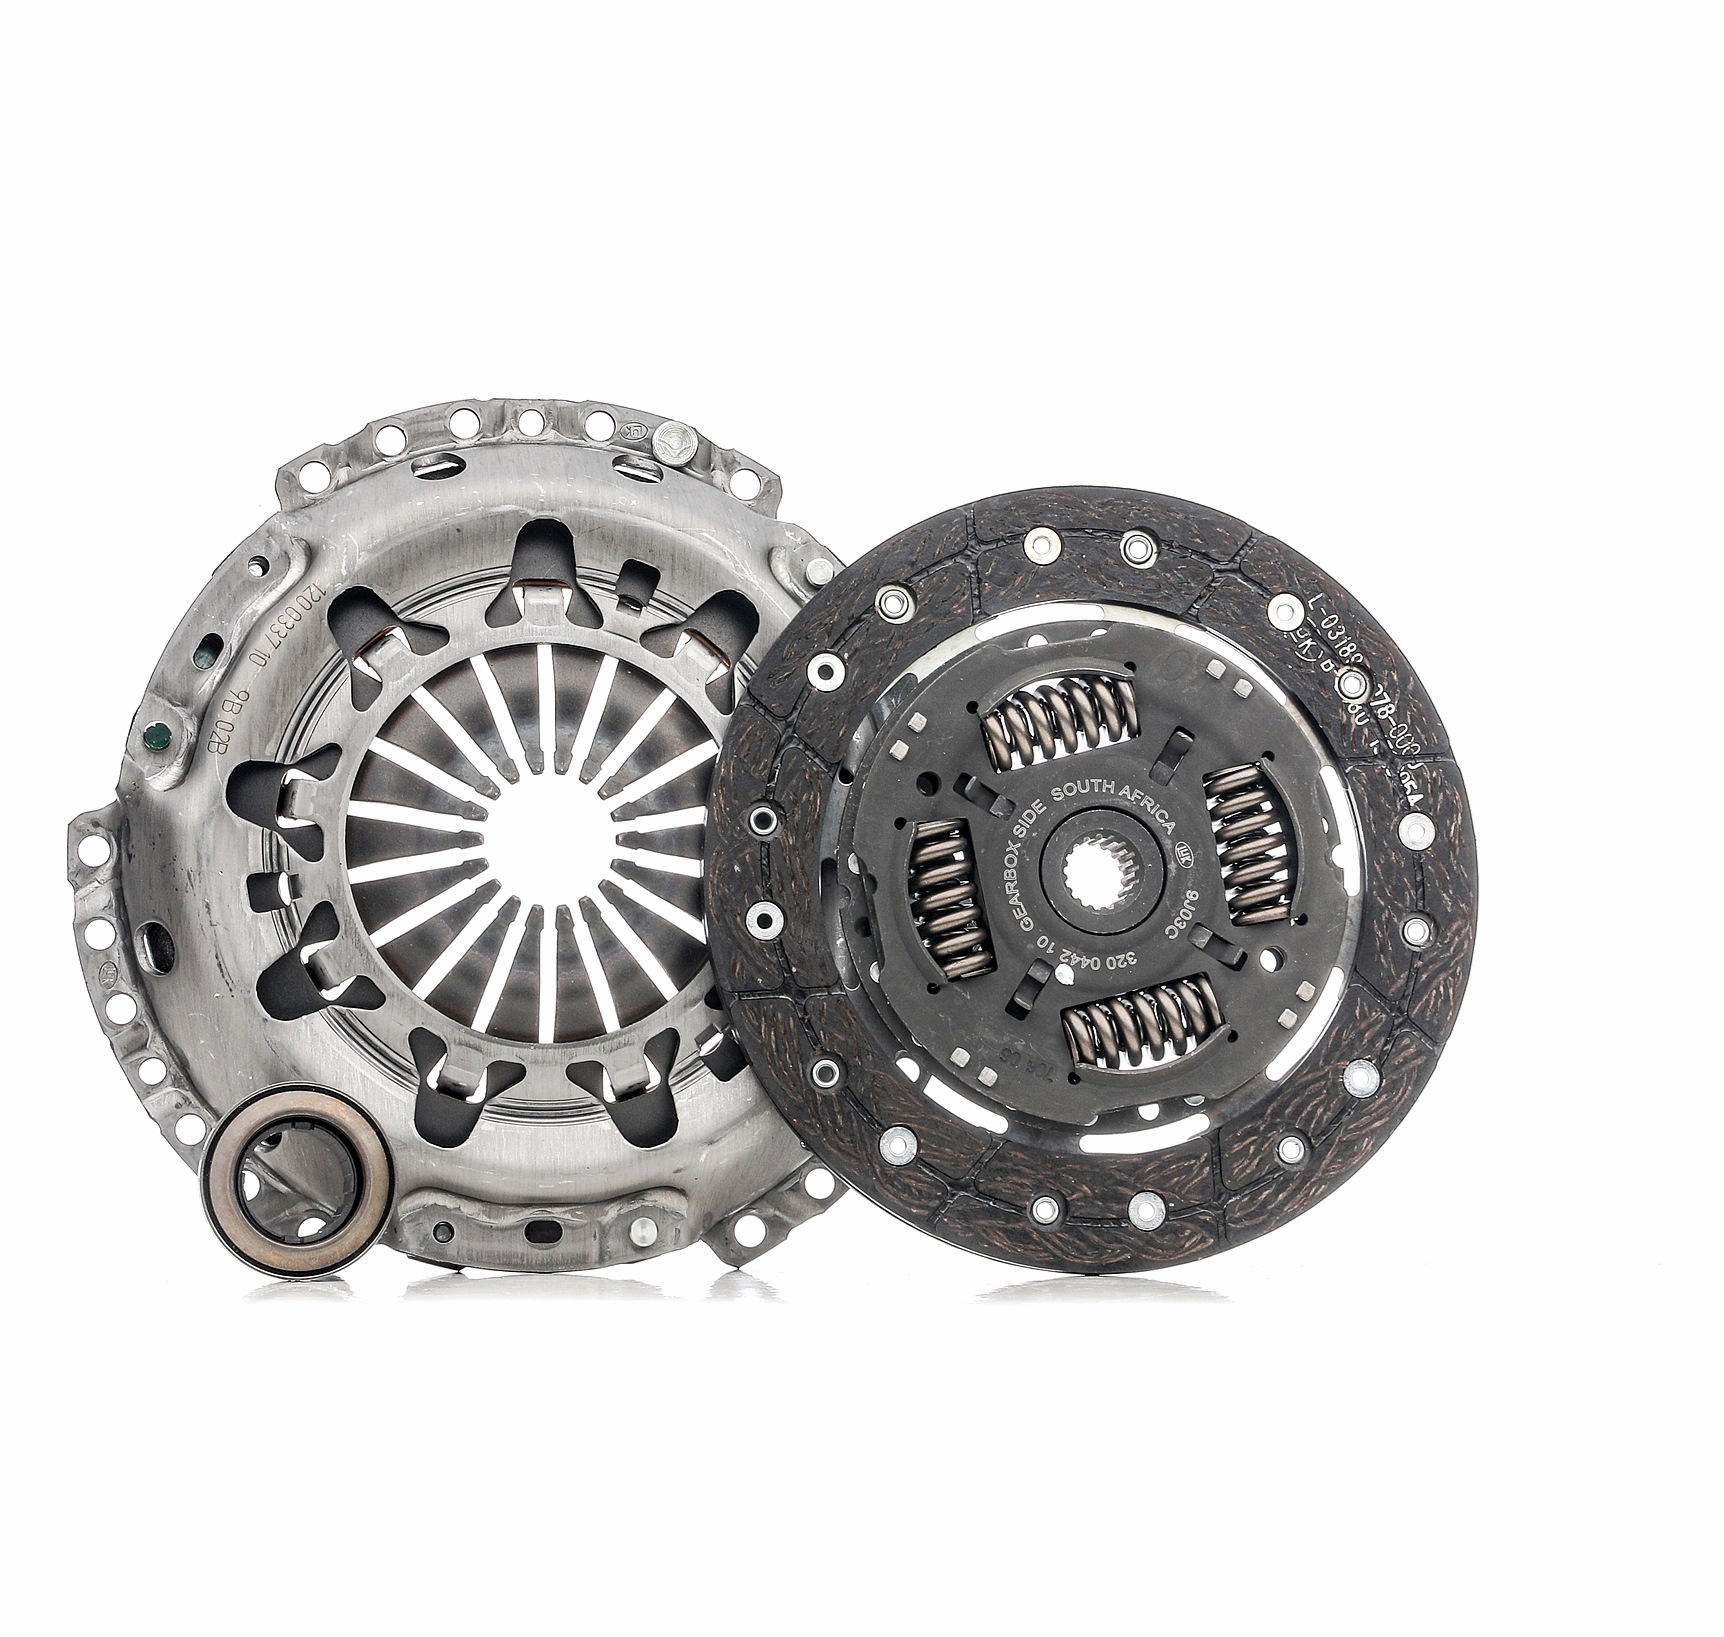 Mini Coupe Complete clutch kit 7428065 LuK 620 3237 00 online buy